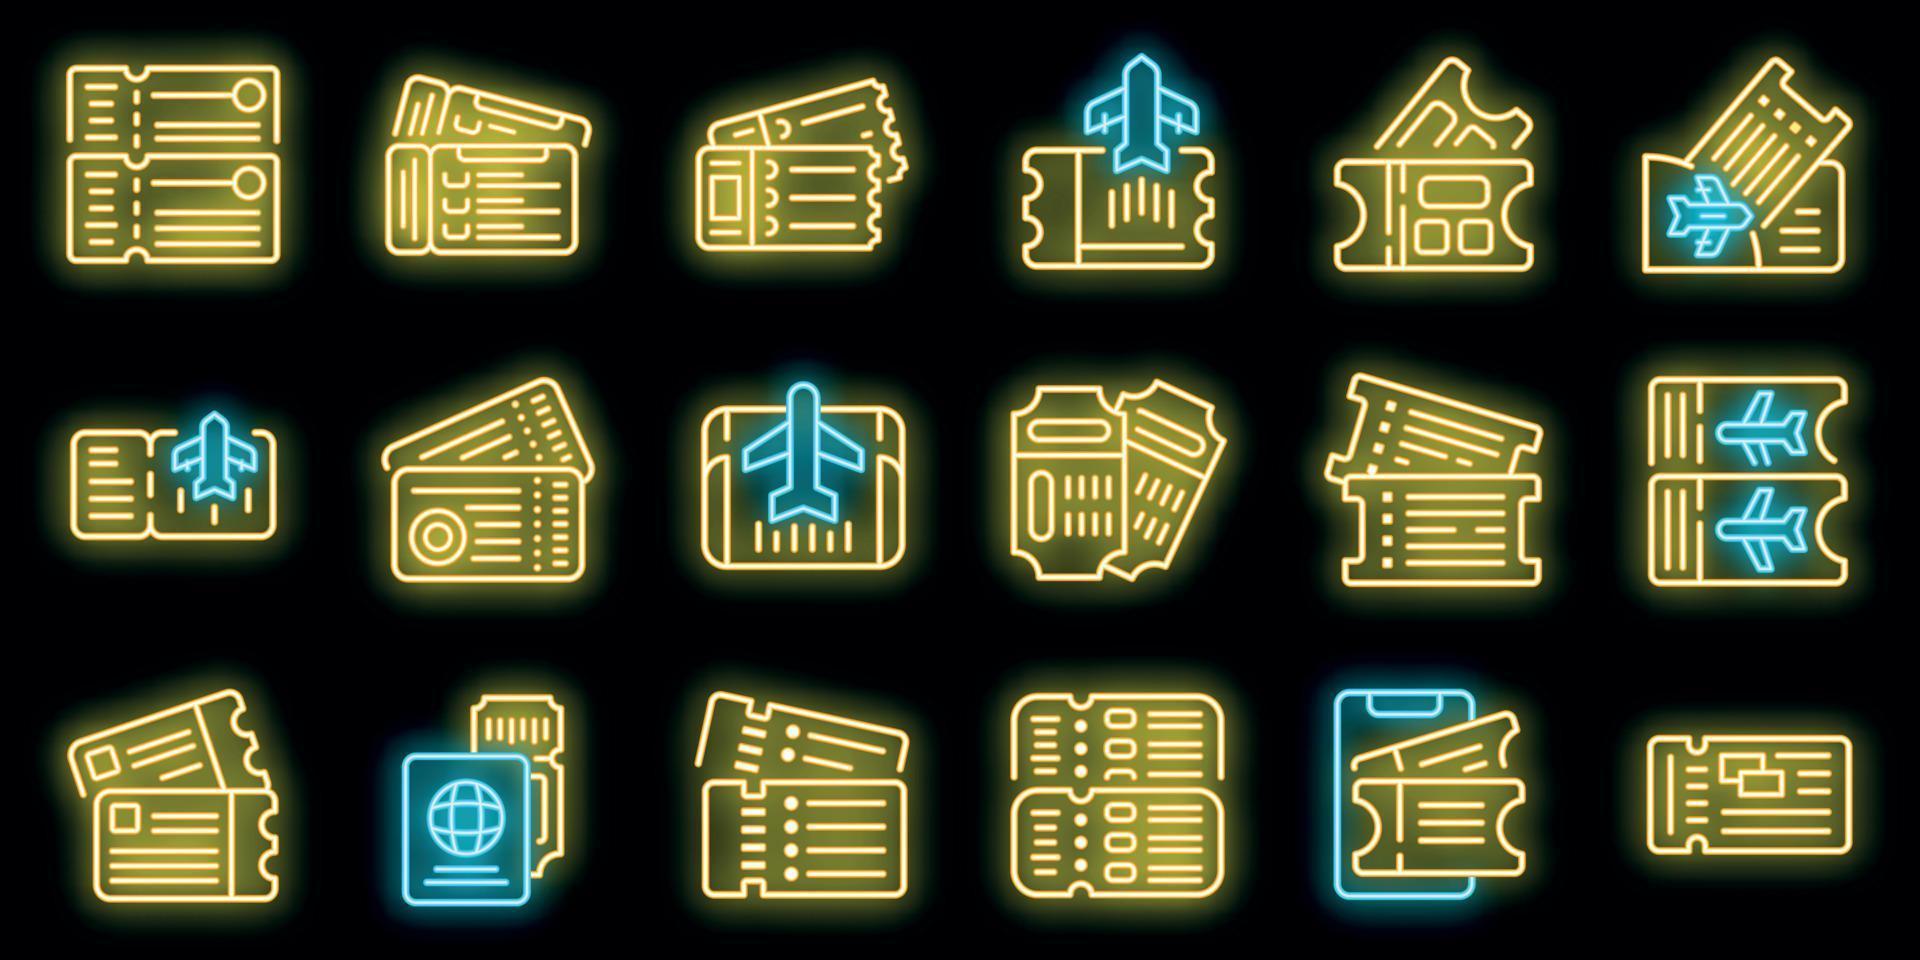 Airline tickets icons set vector neon